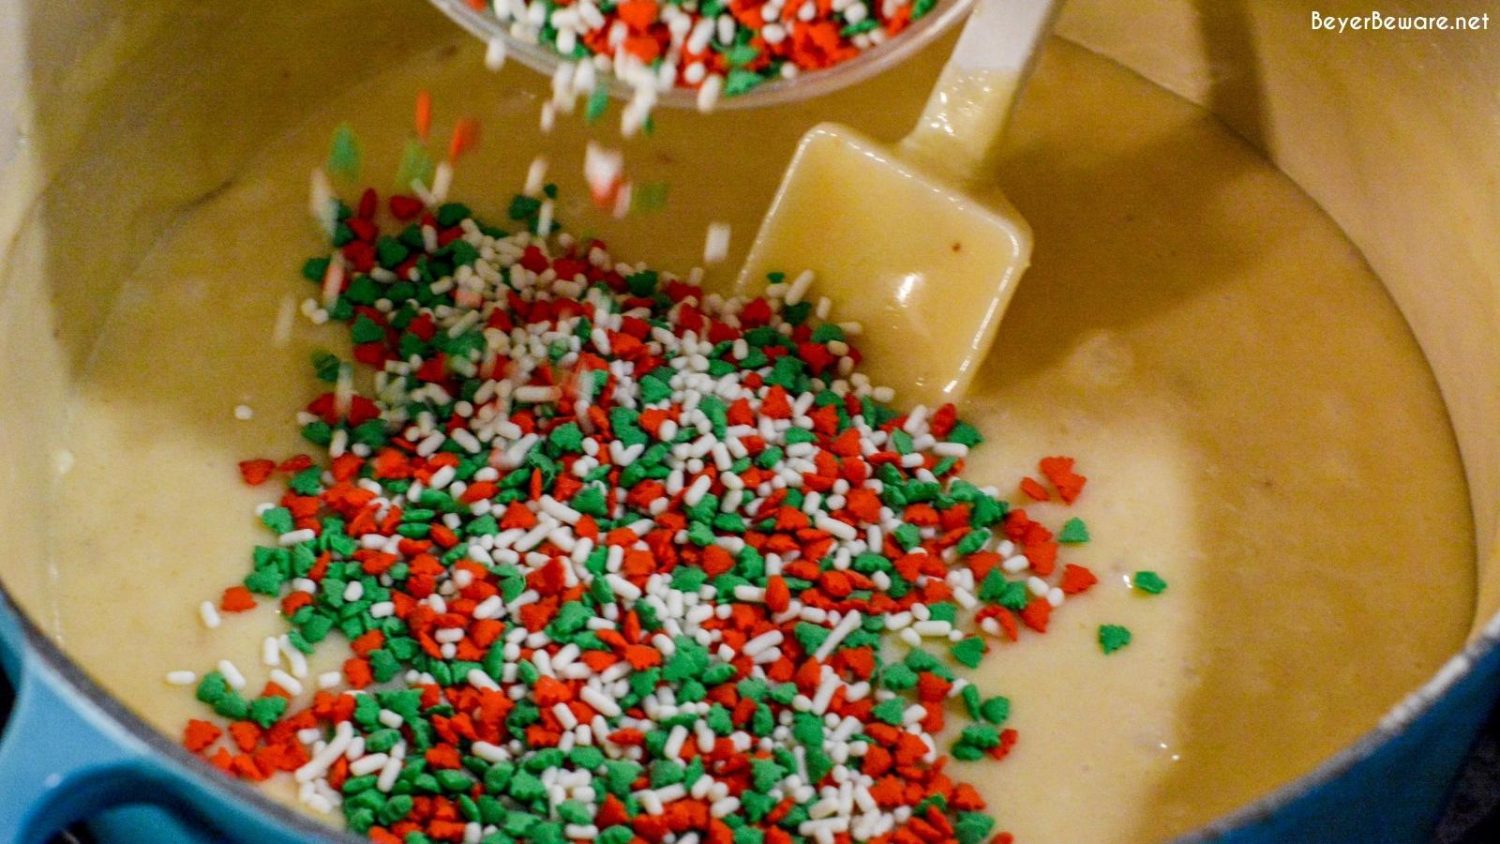 Sugar Cookie Fudge is an easy-to-make ingredient Christmas fudge recipe that combines white chocolate fudge with the flavors of sugar cookies.